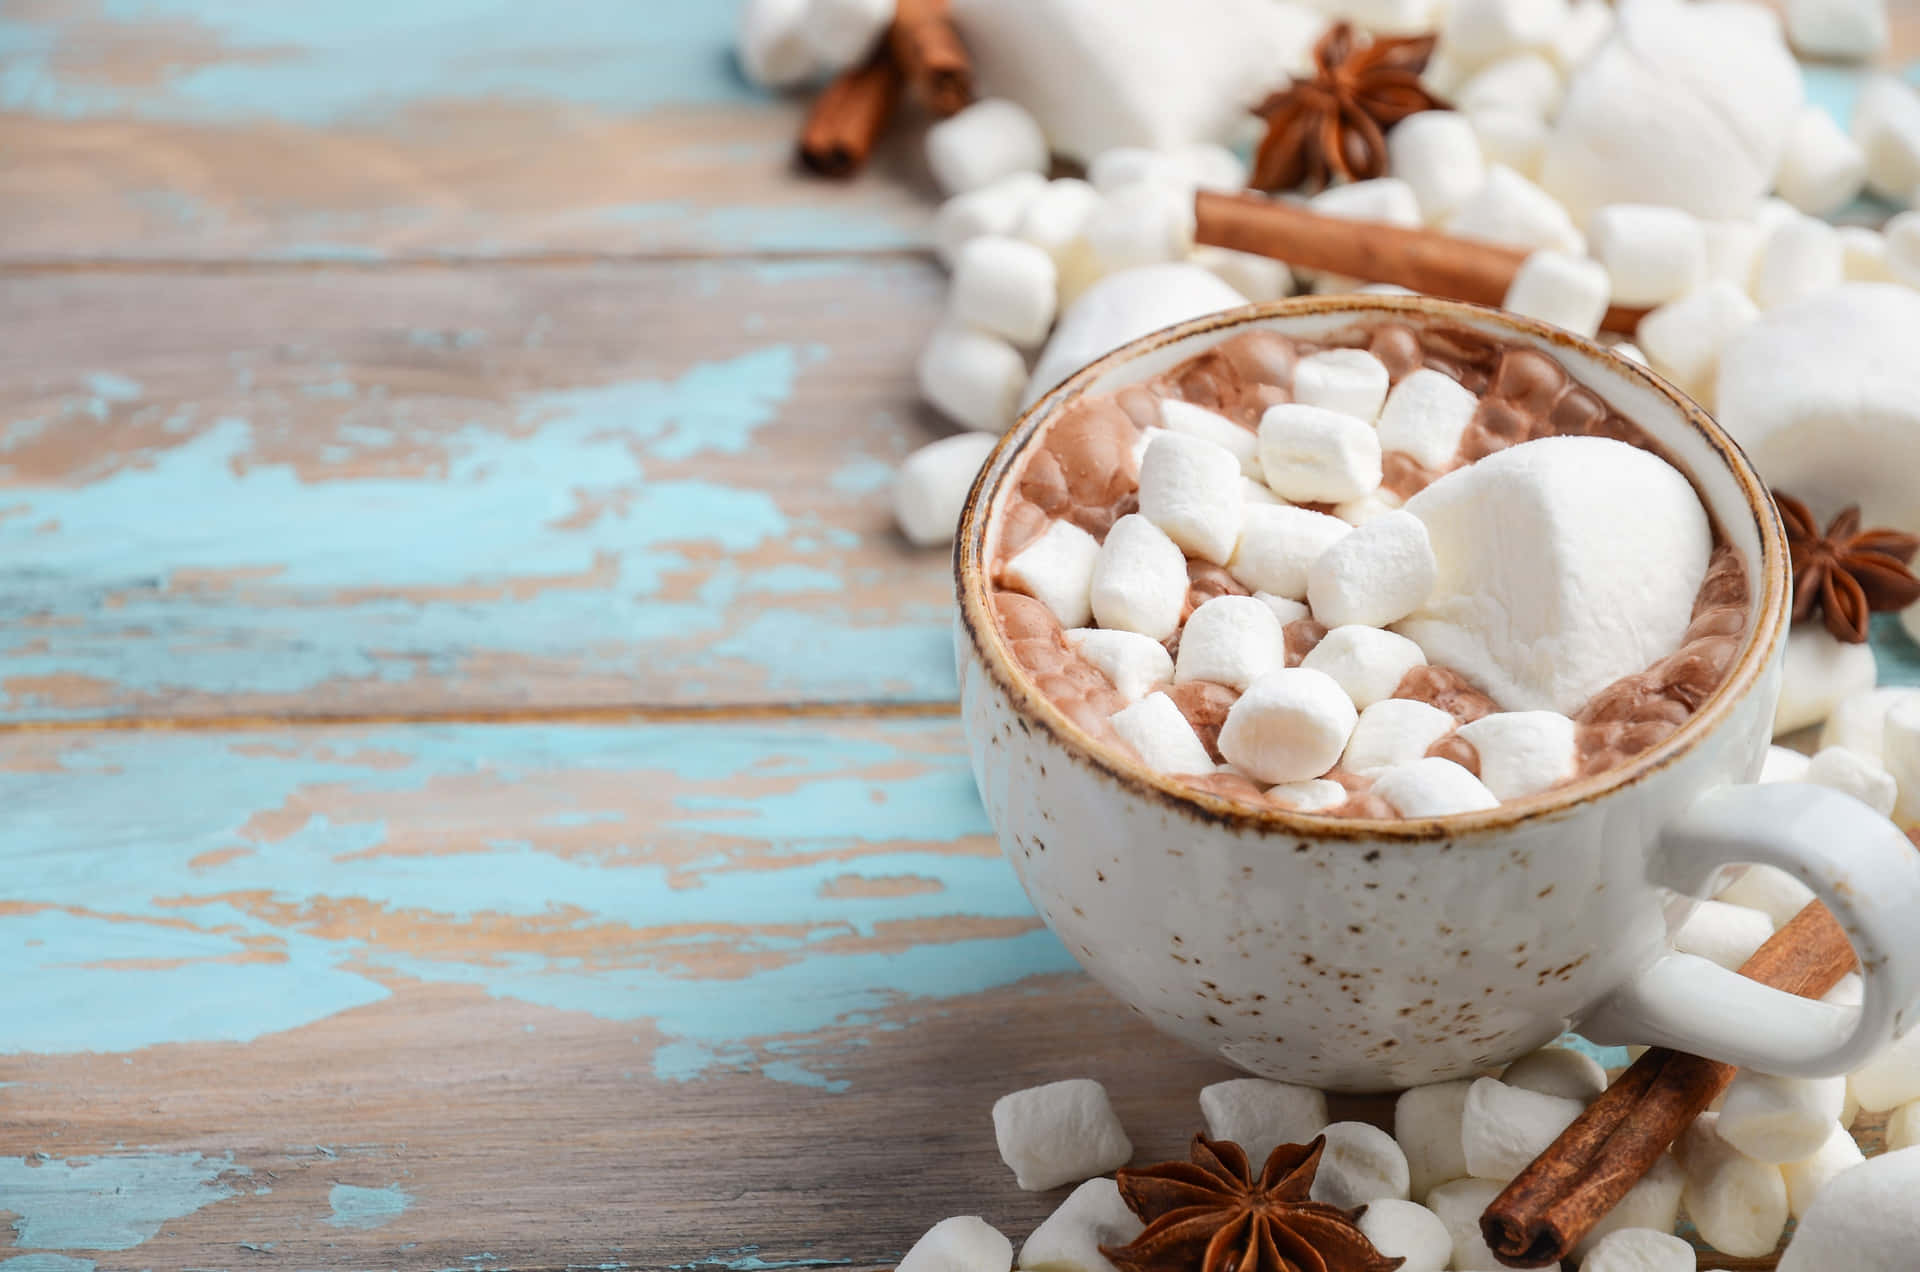 Steaming Hot Chocolate in a Mug with Marshmallows Wallpaper